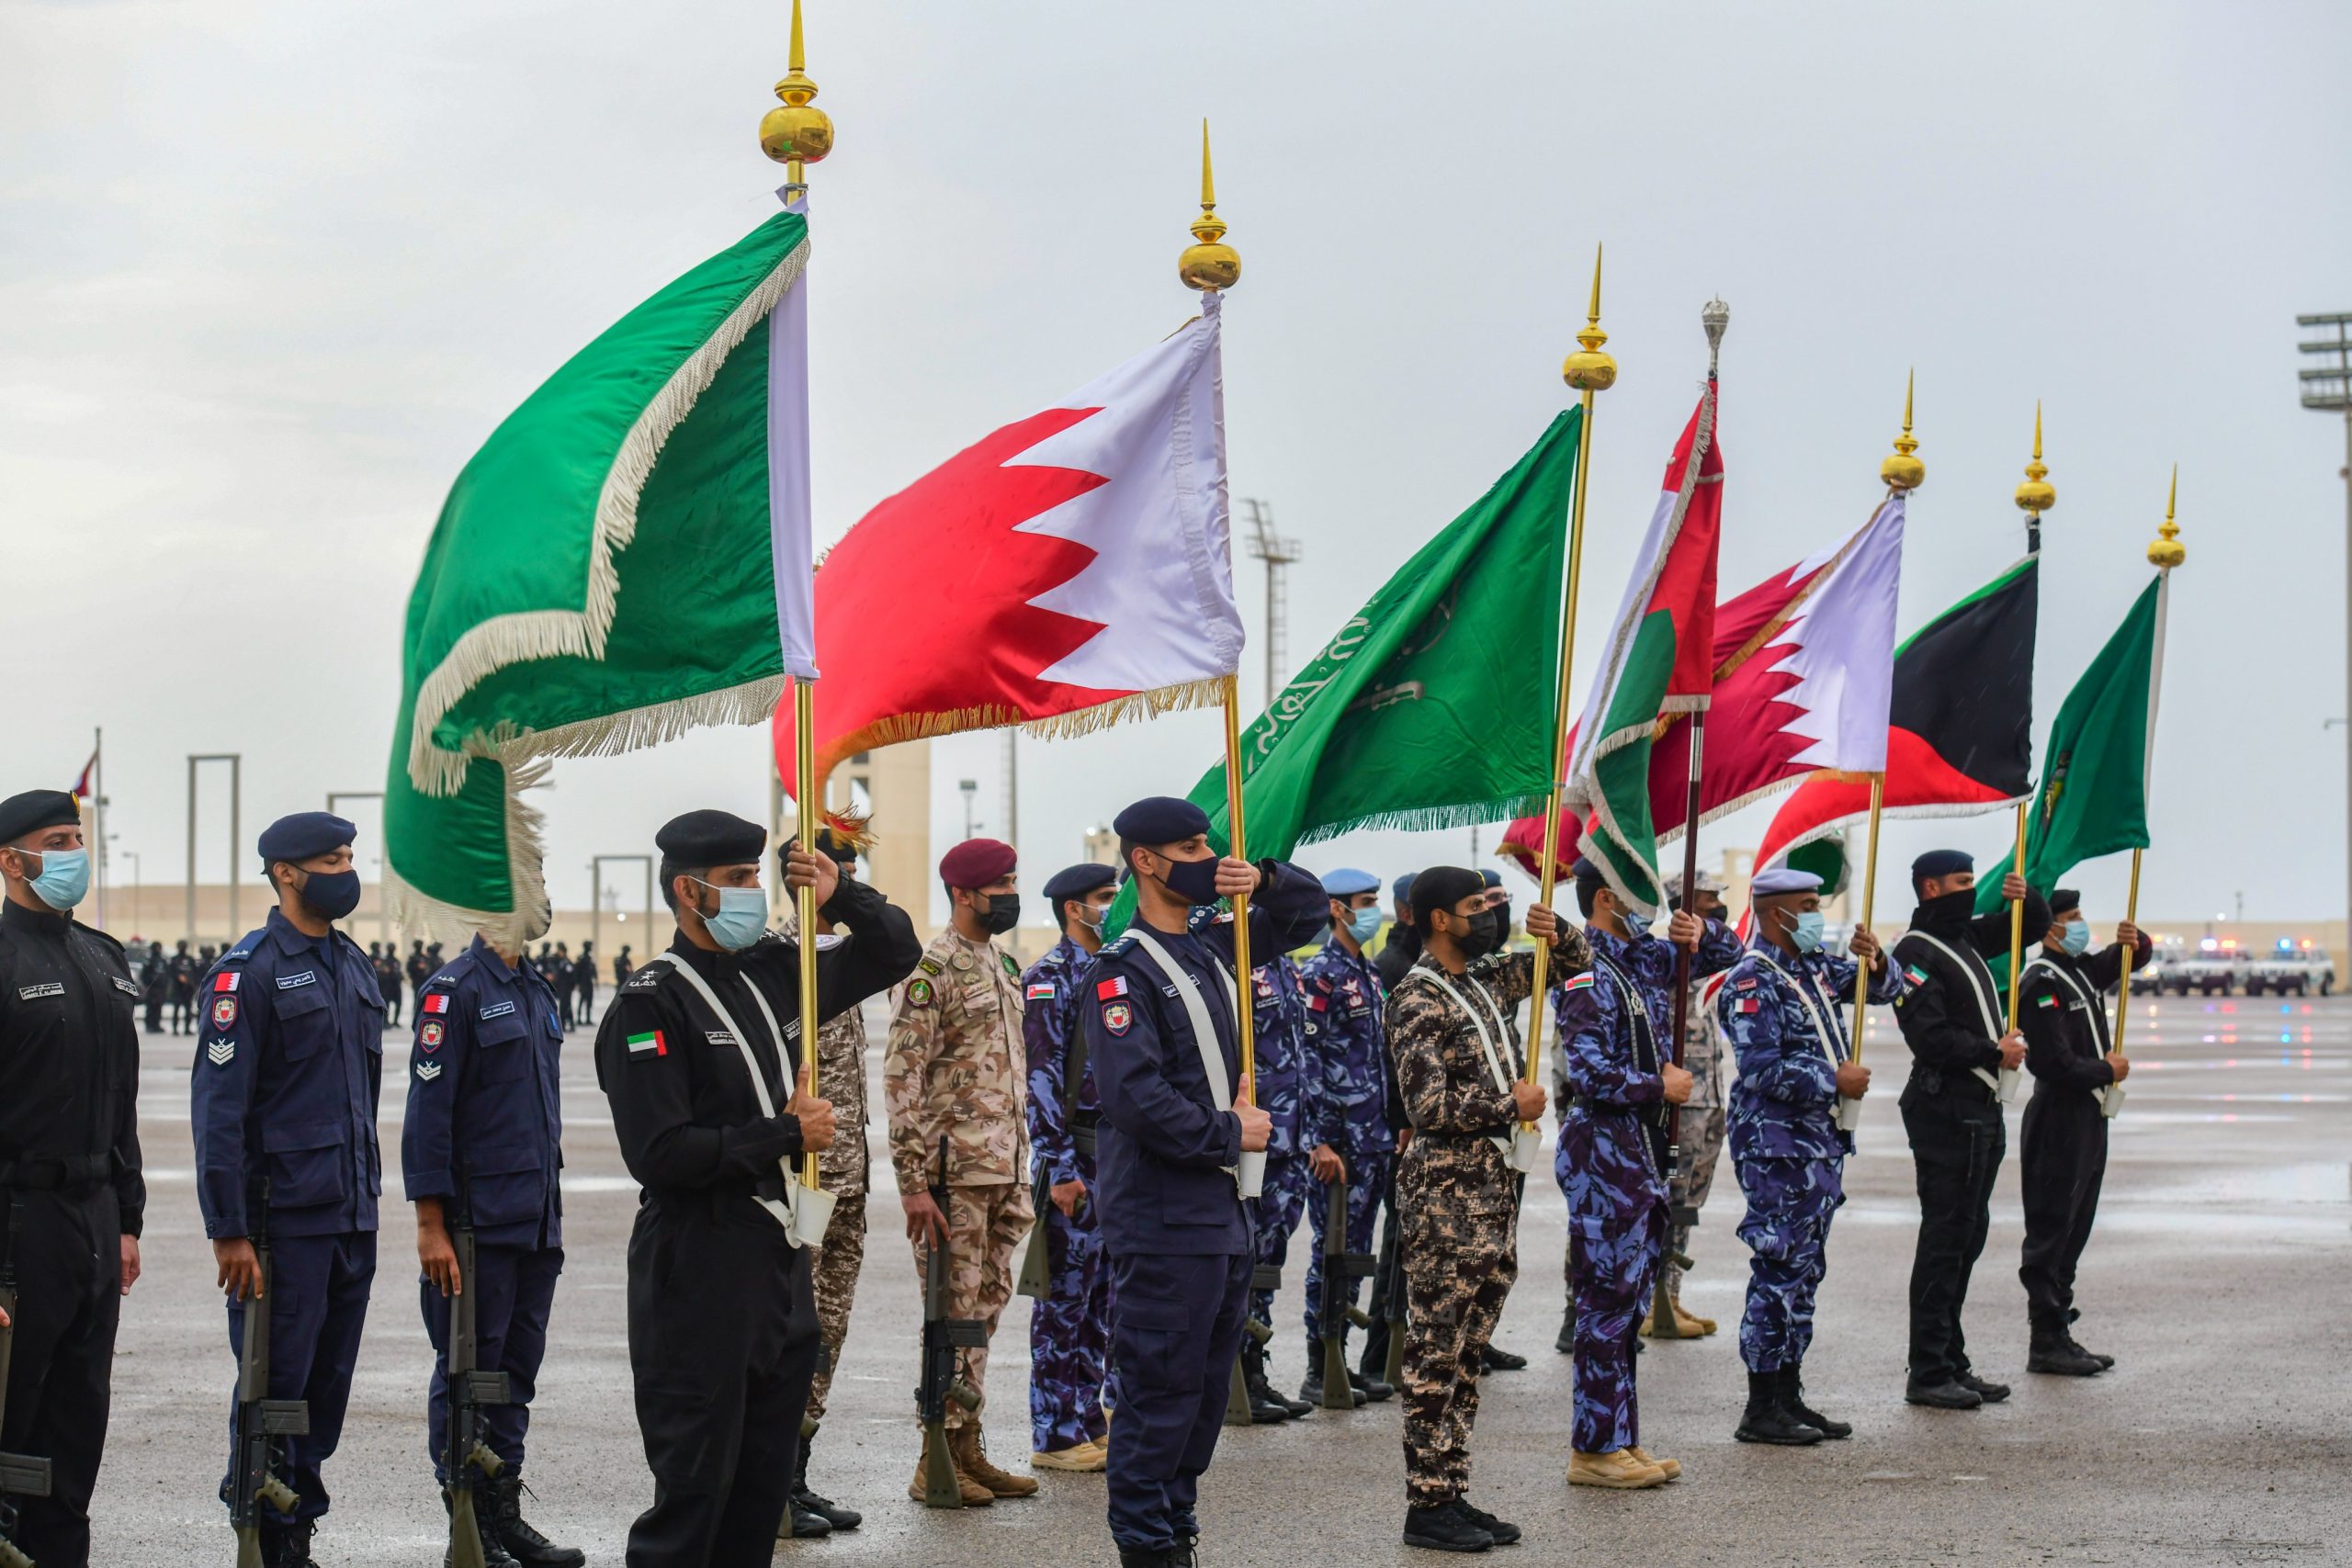 Qatar Participates in Joint Tactical Exercise "Arab Gulf Security 3"